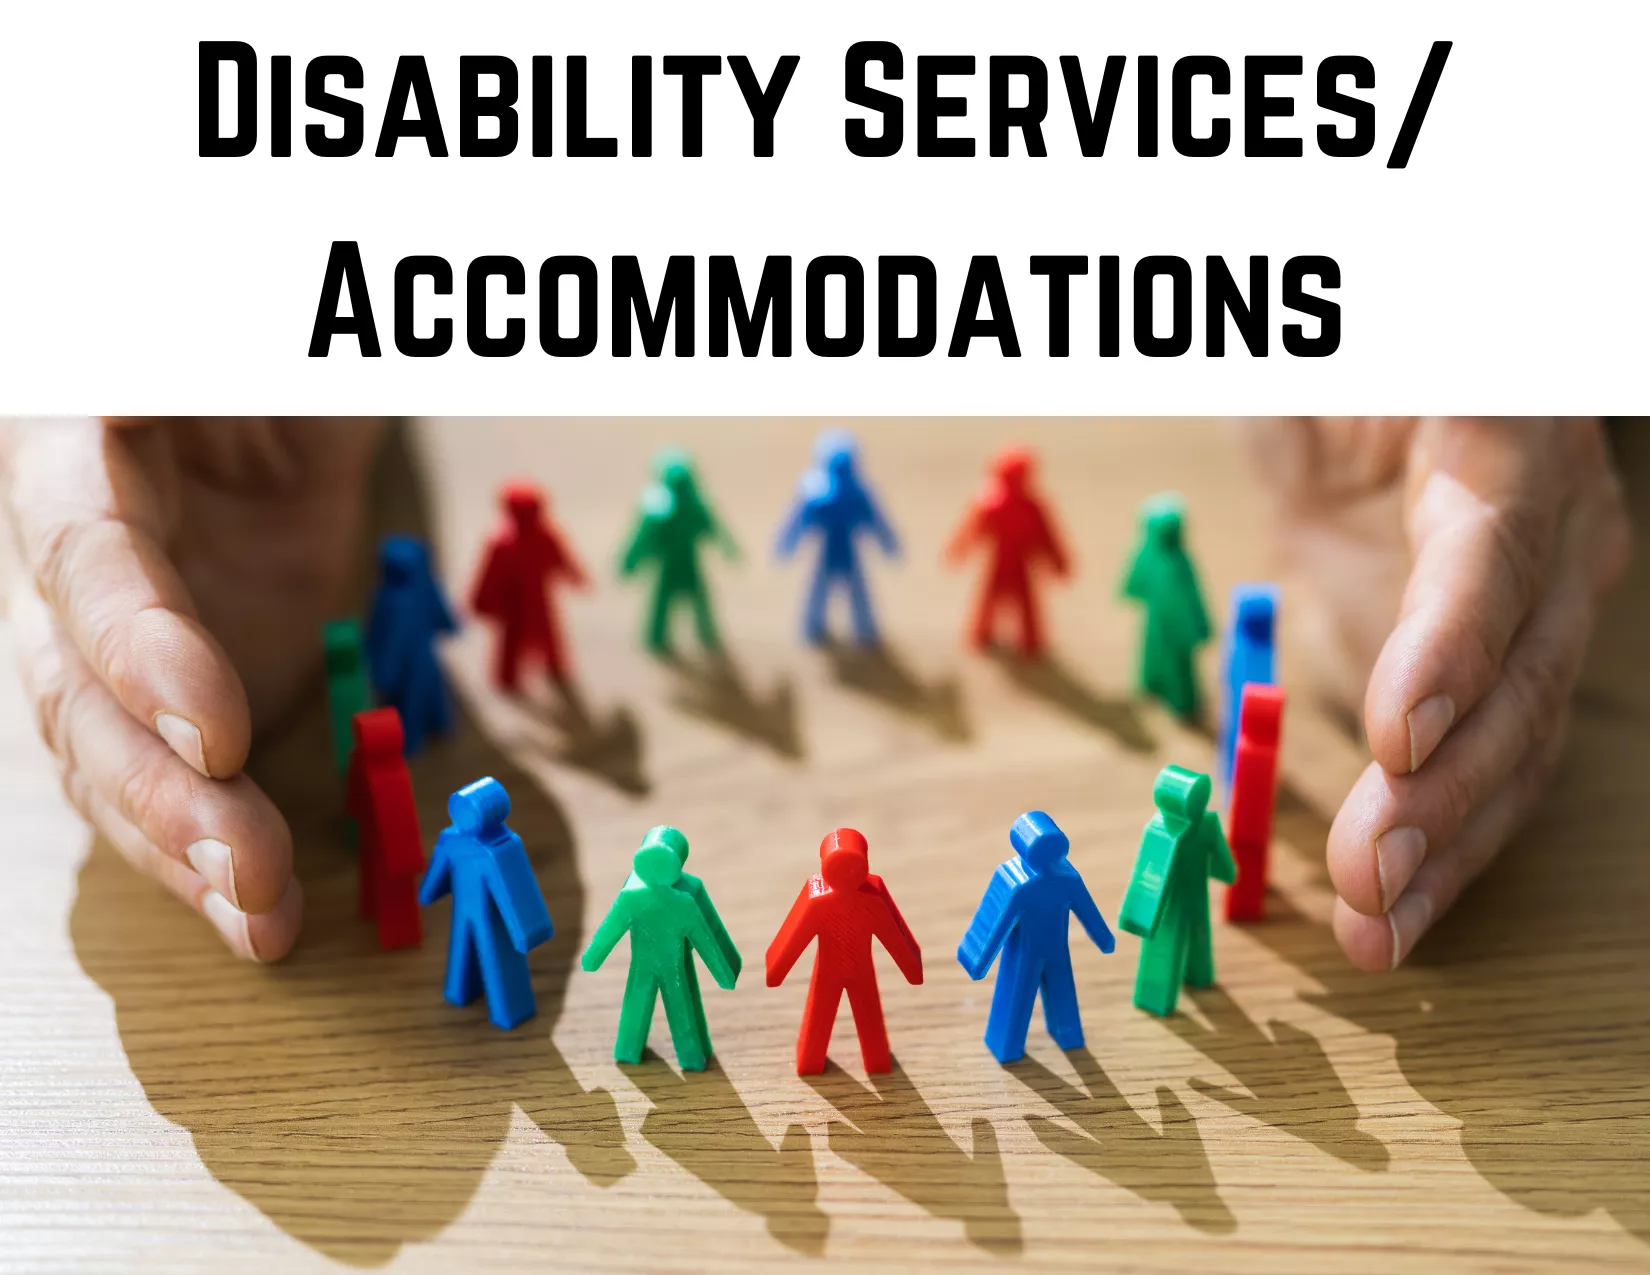 Disability Services/Accommodations